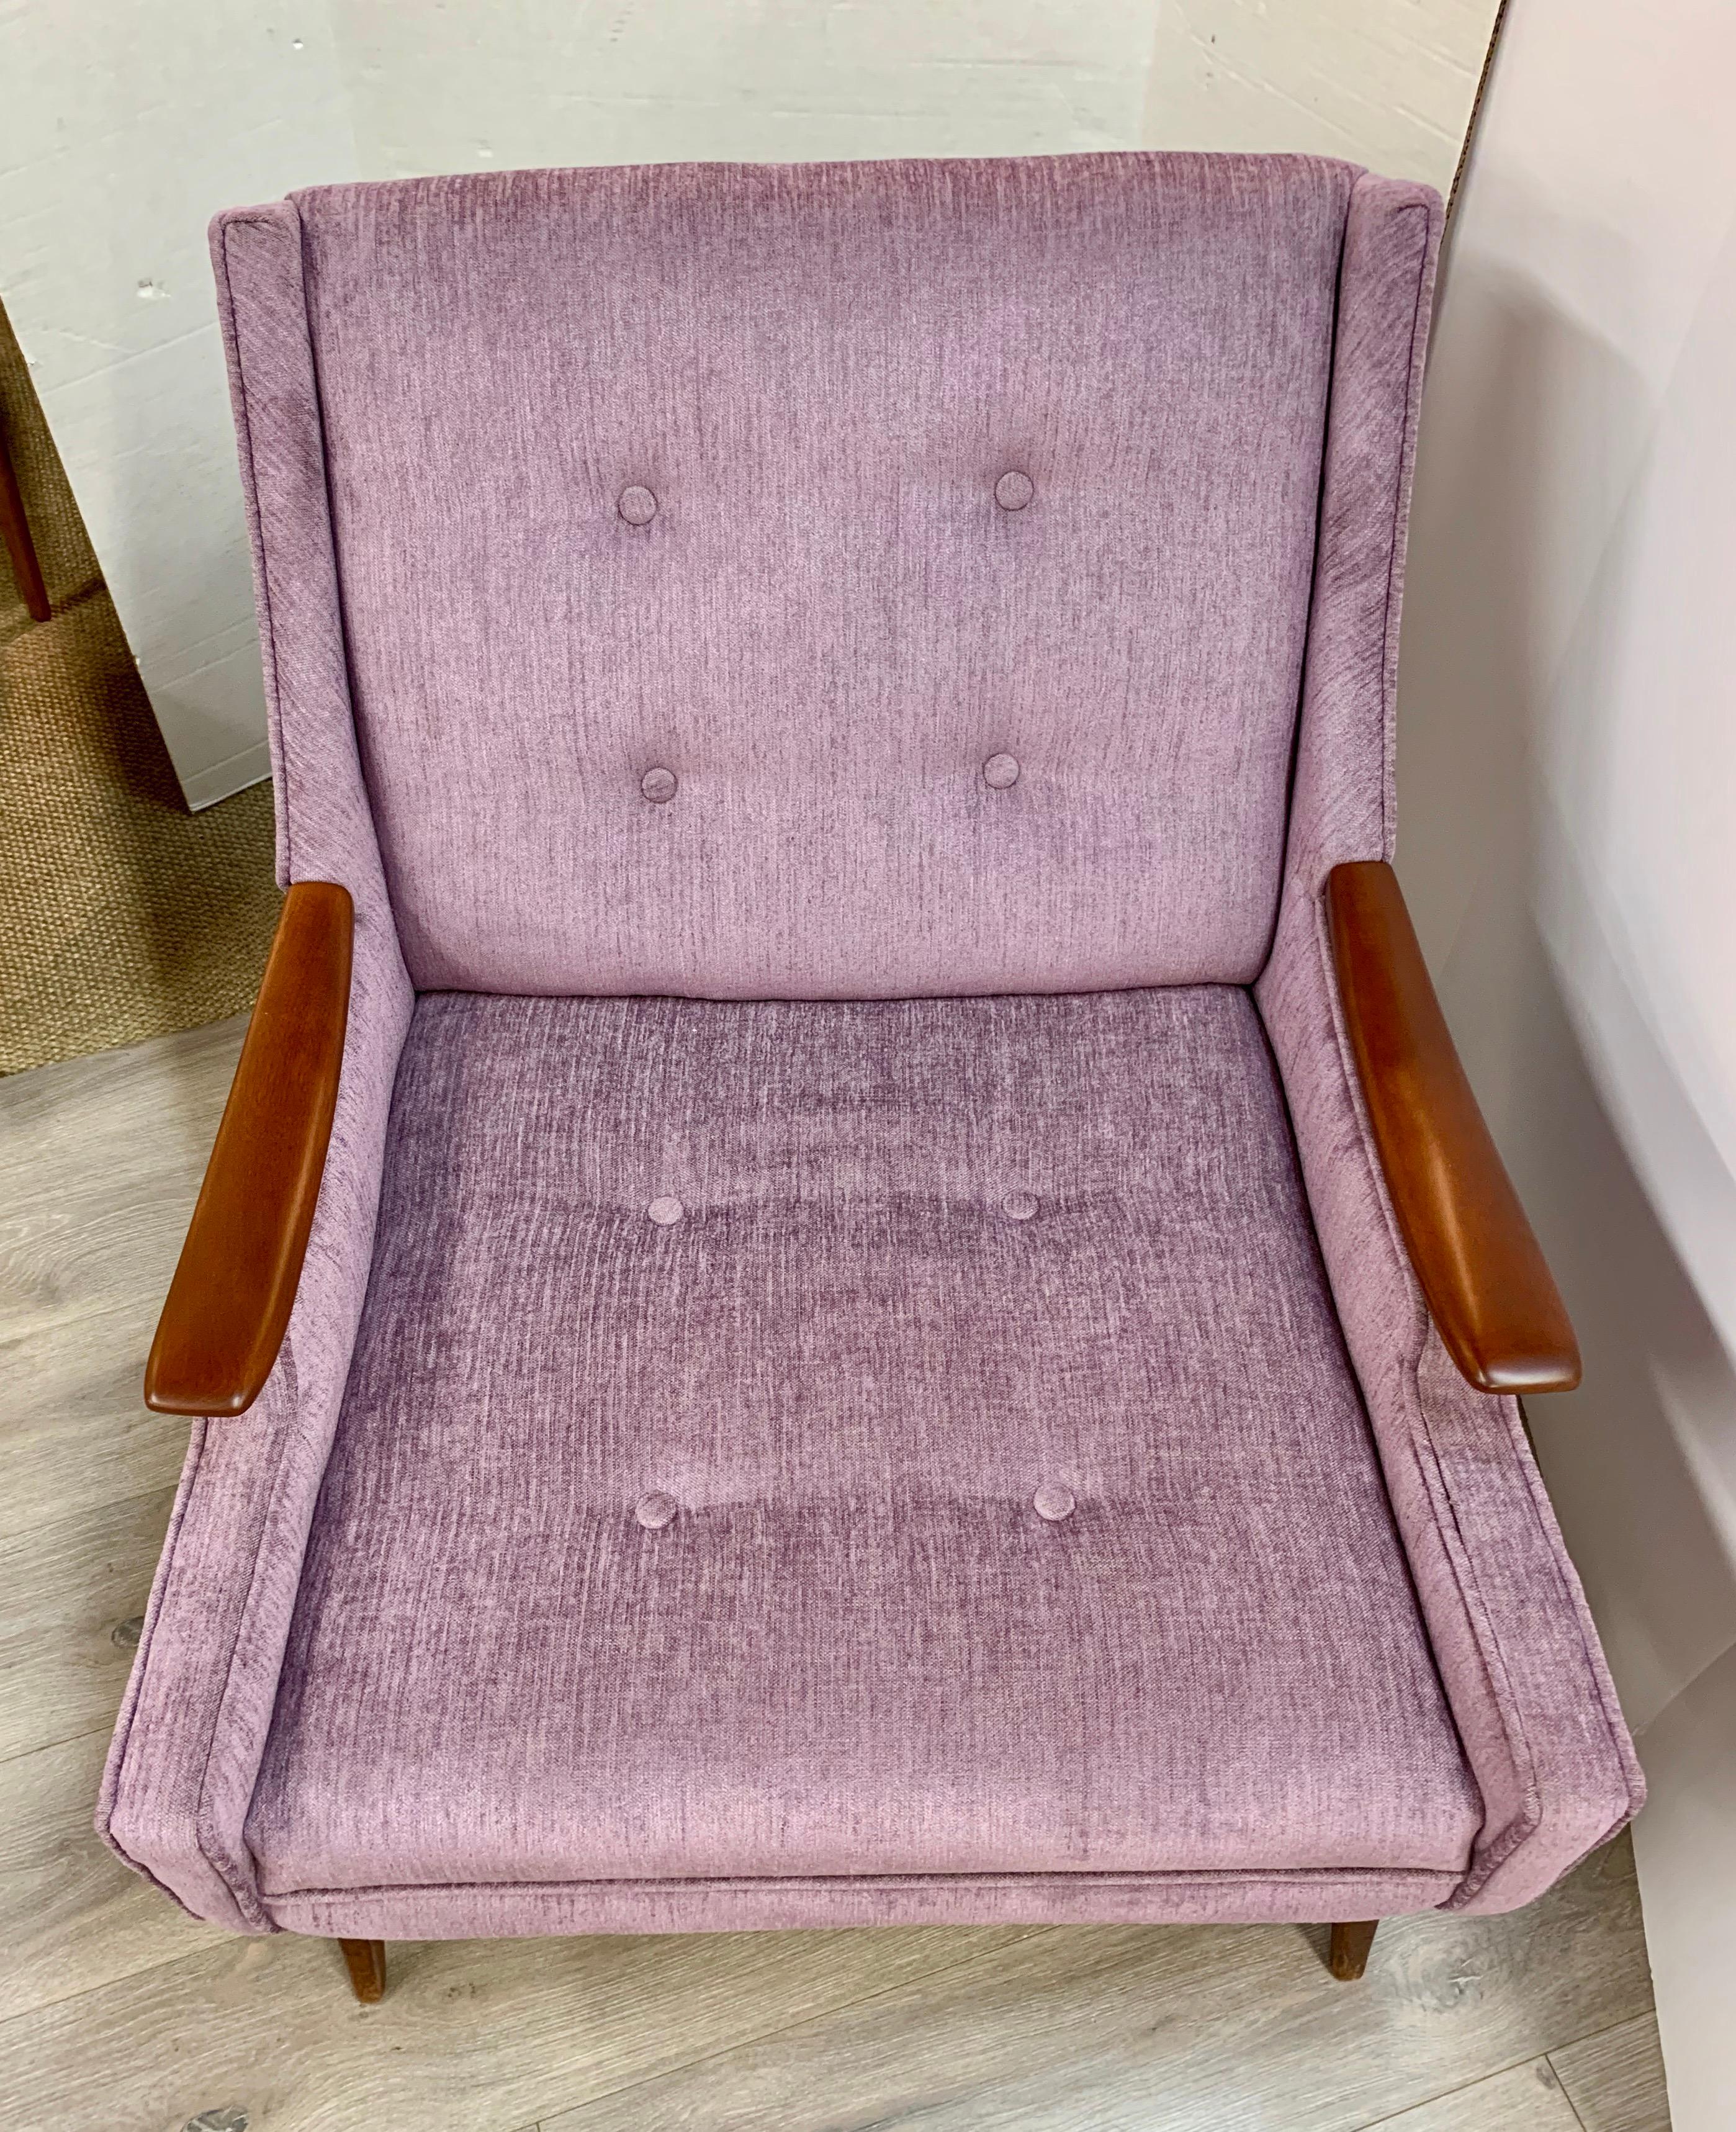 Danish Mid-Century Modern Tufted Lounge Chair in Lavender Upholstery